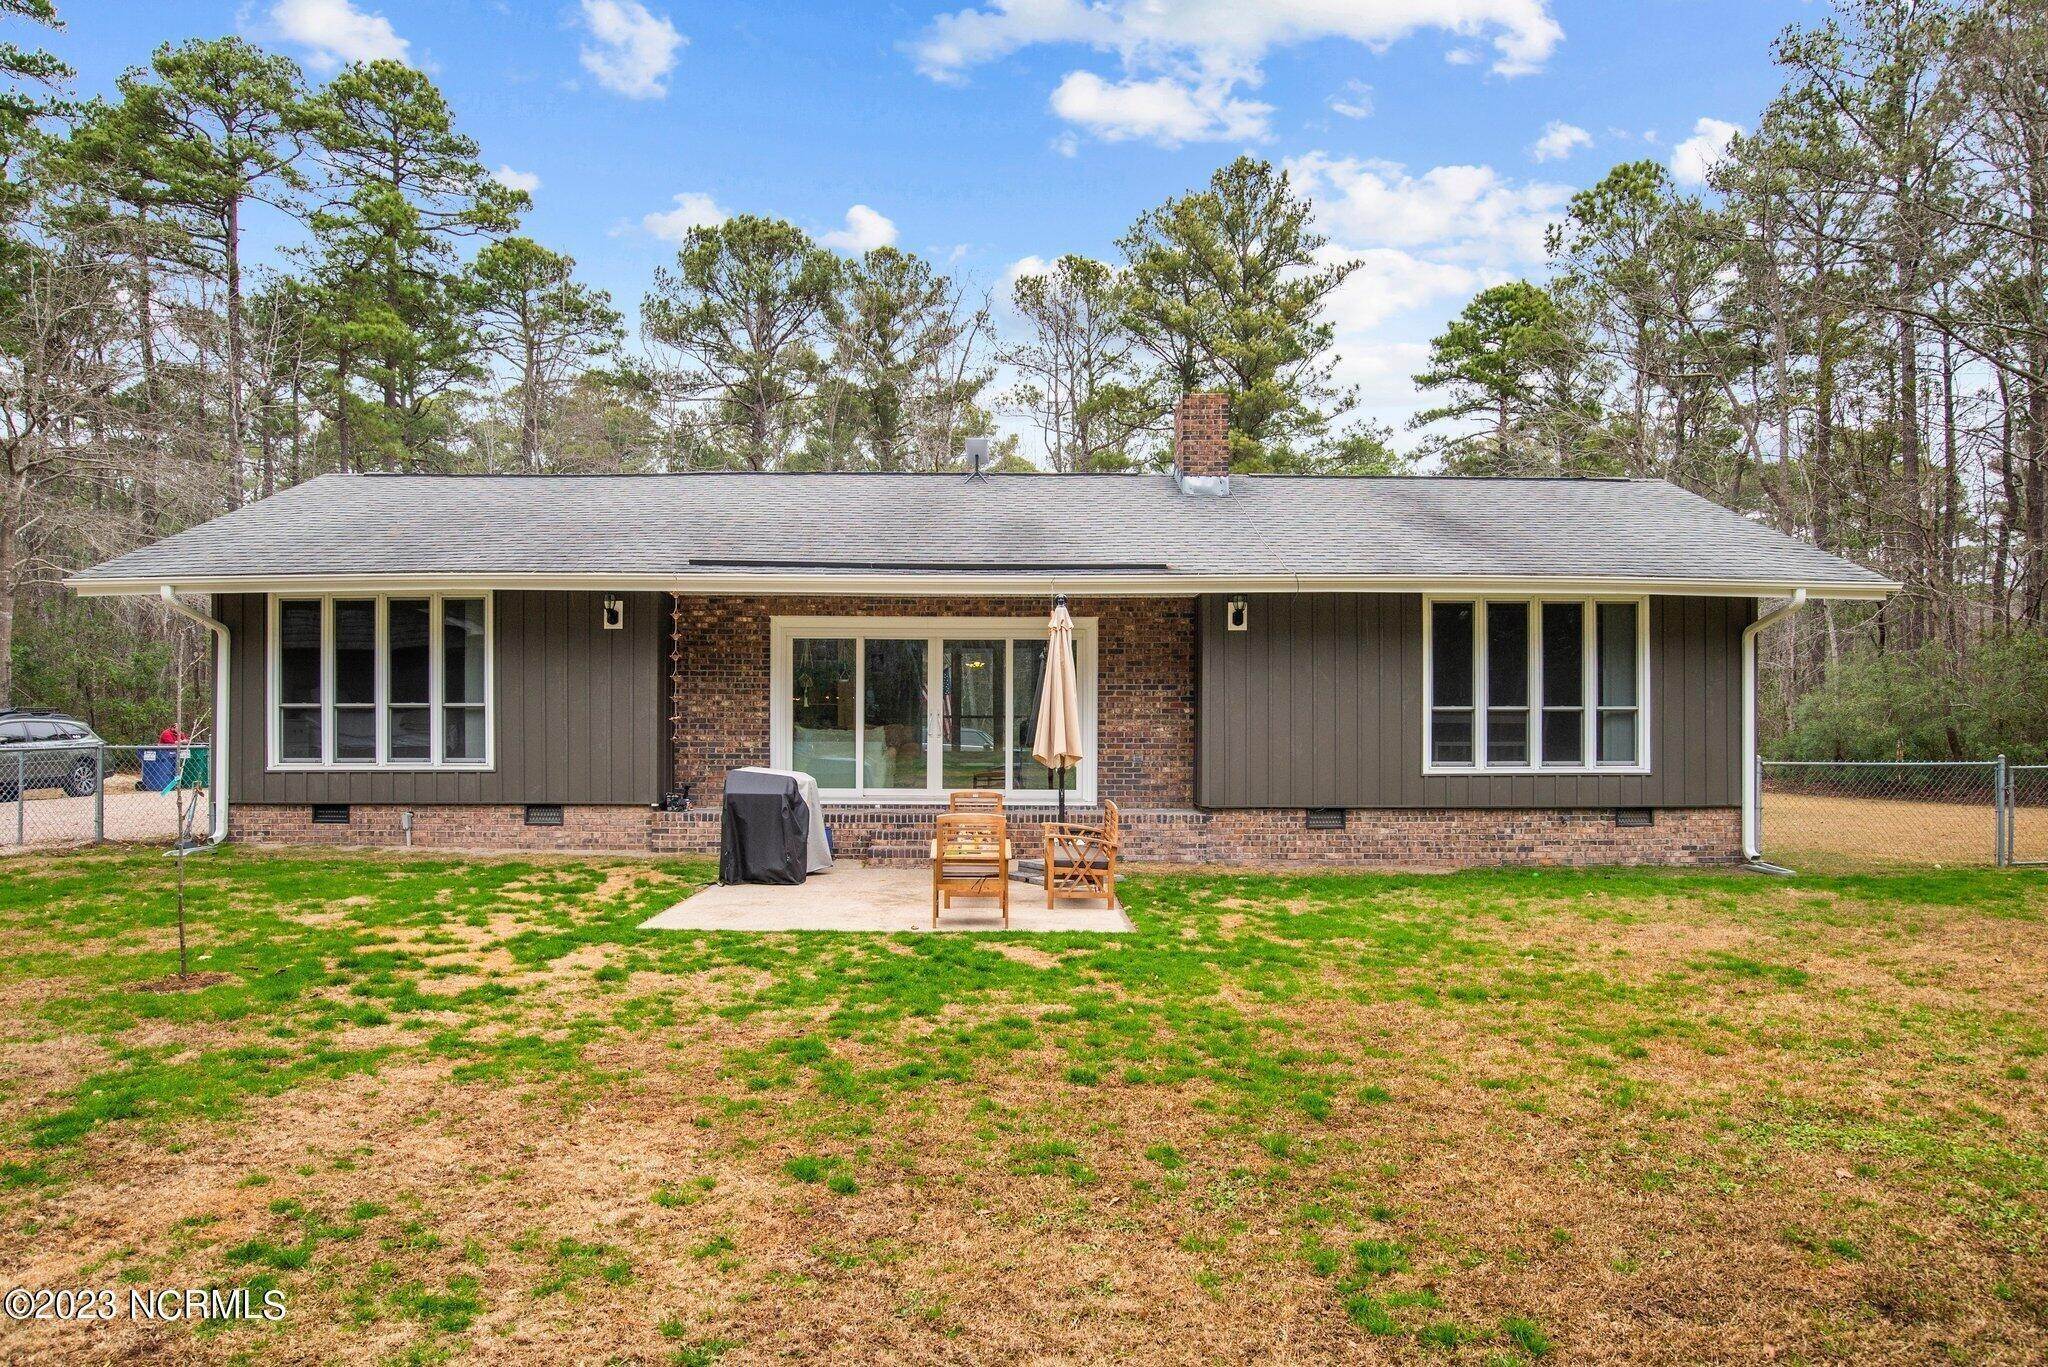 39. Single Family for Sale at Greenville, NC 27834